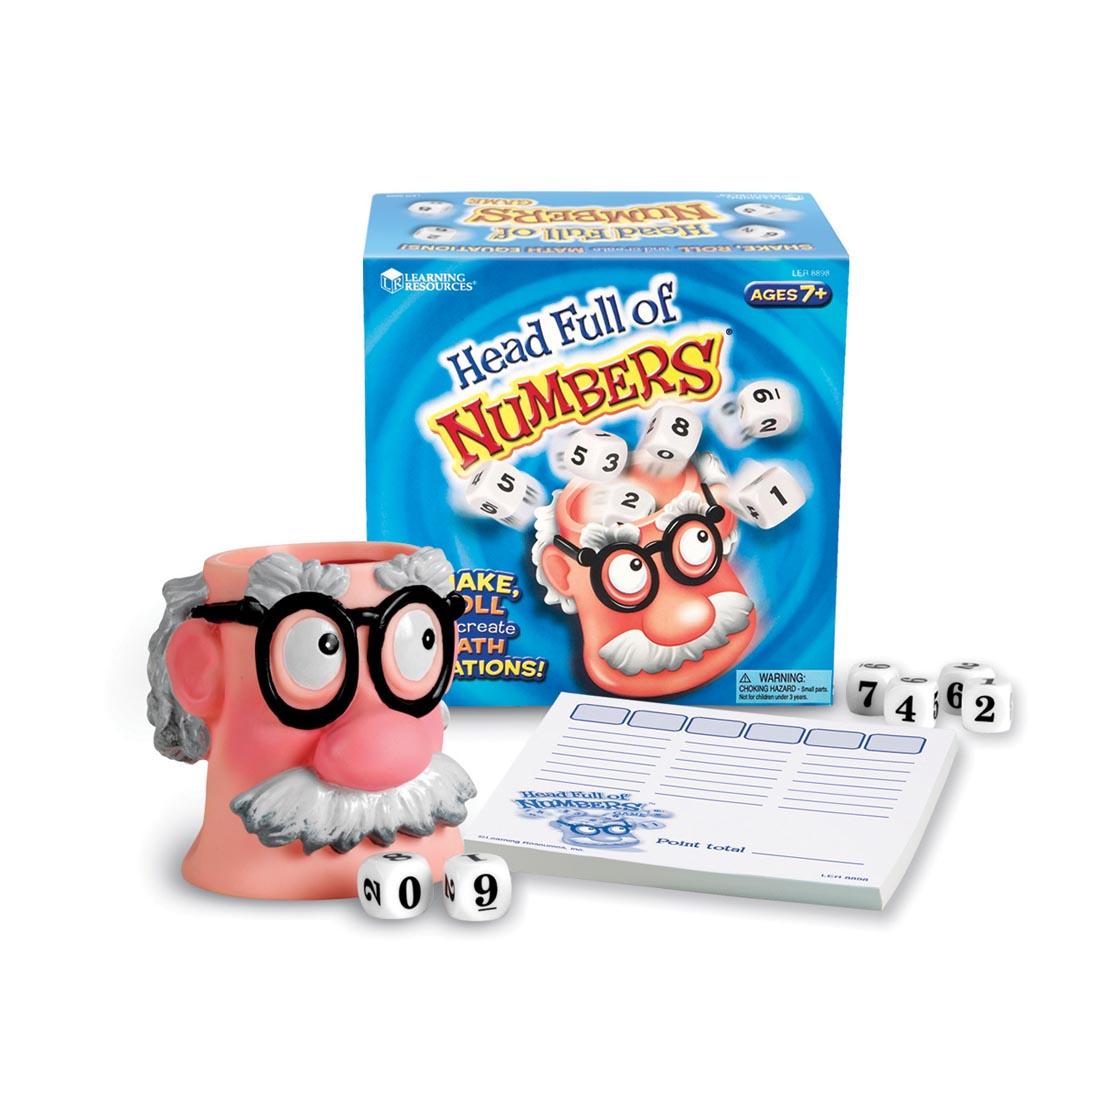 Head Full of Numbers Math Game with contents shown outside of packaging